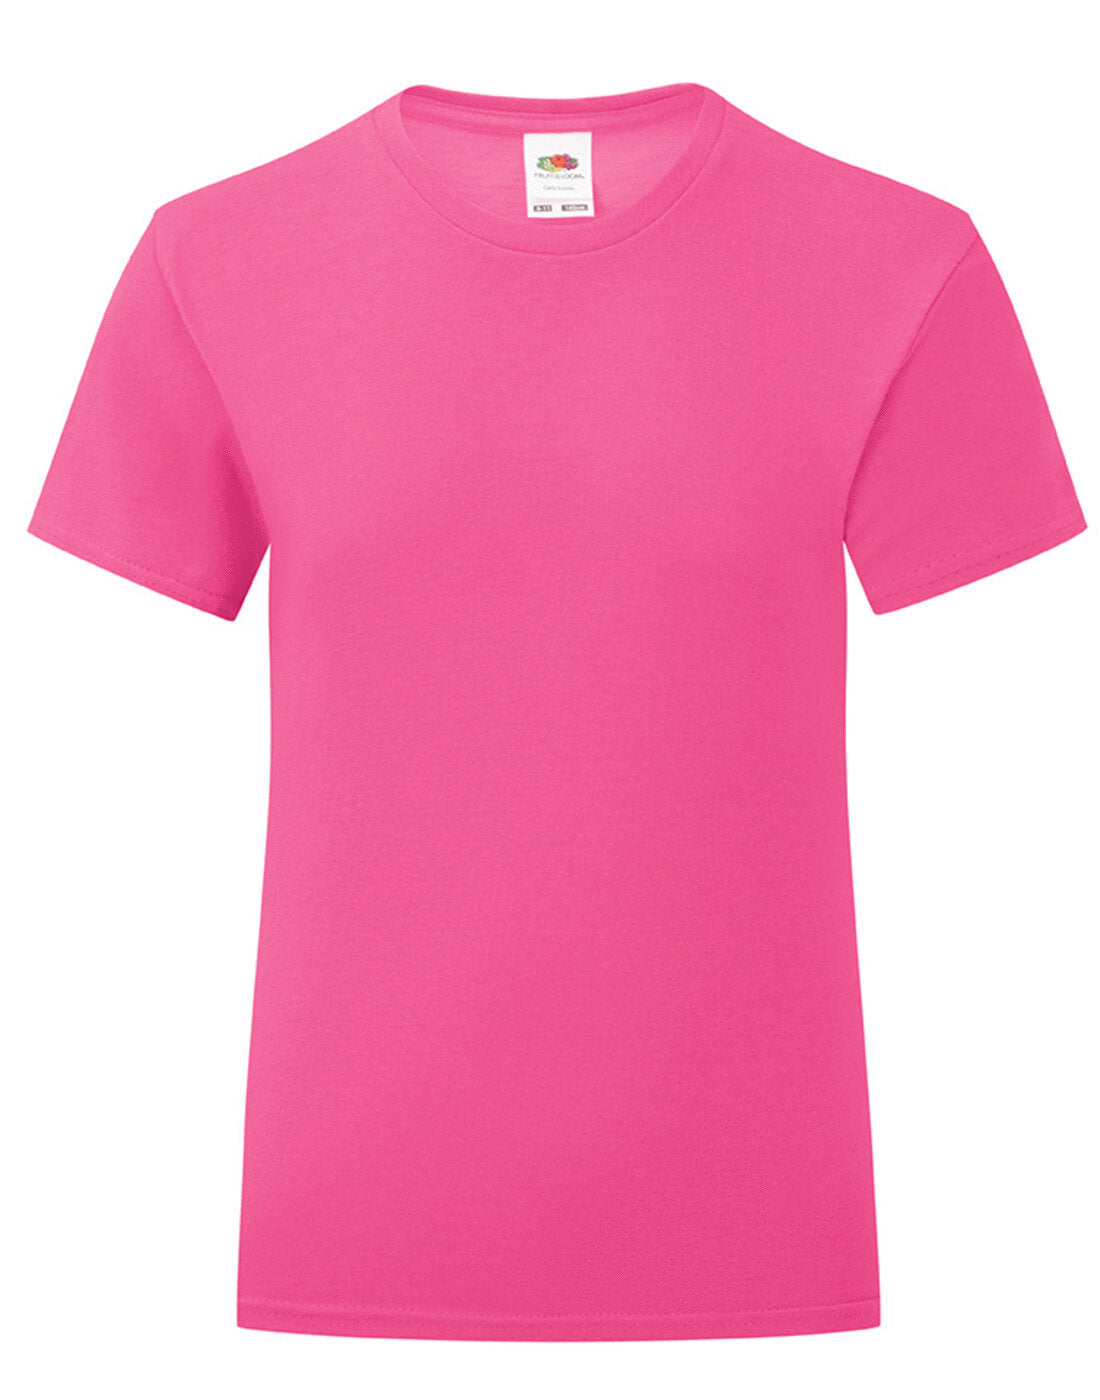 Fruit of the Loom Girls Iconic T - Fuchsia Pink